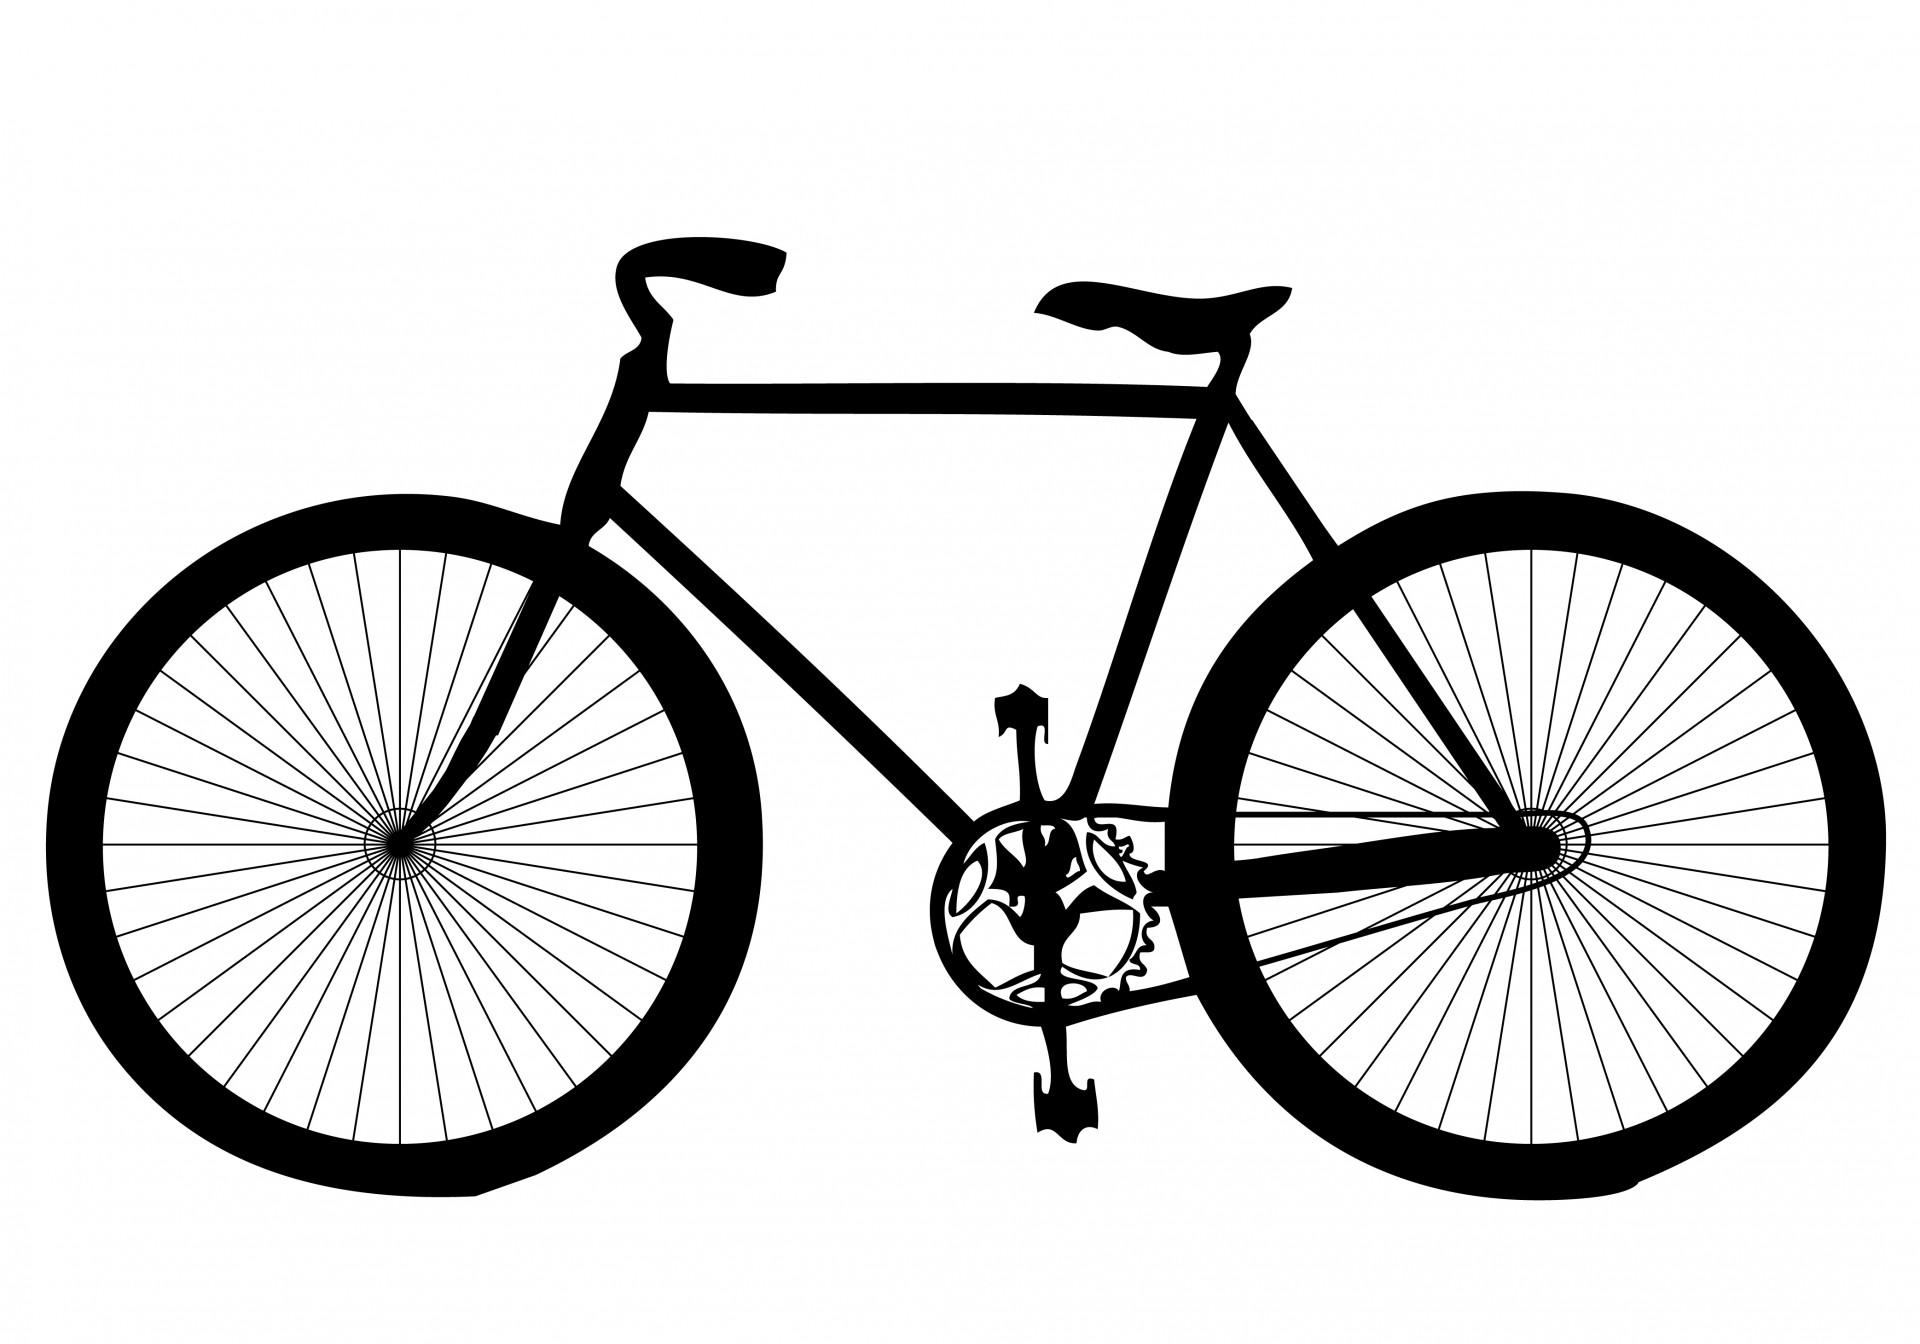 Free bicycle clipart - ClipartFox